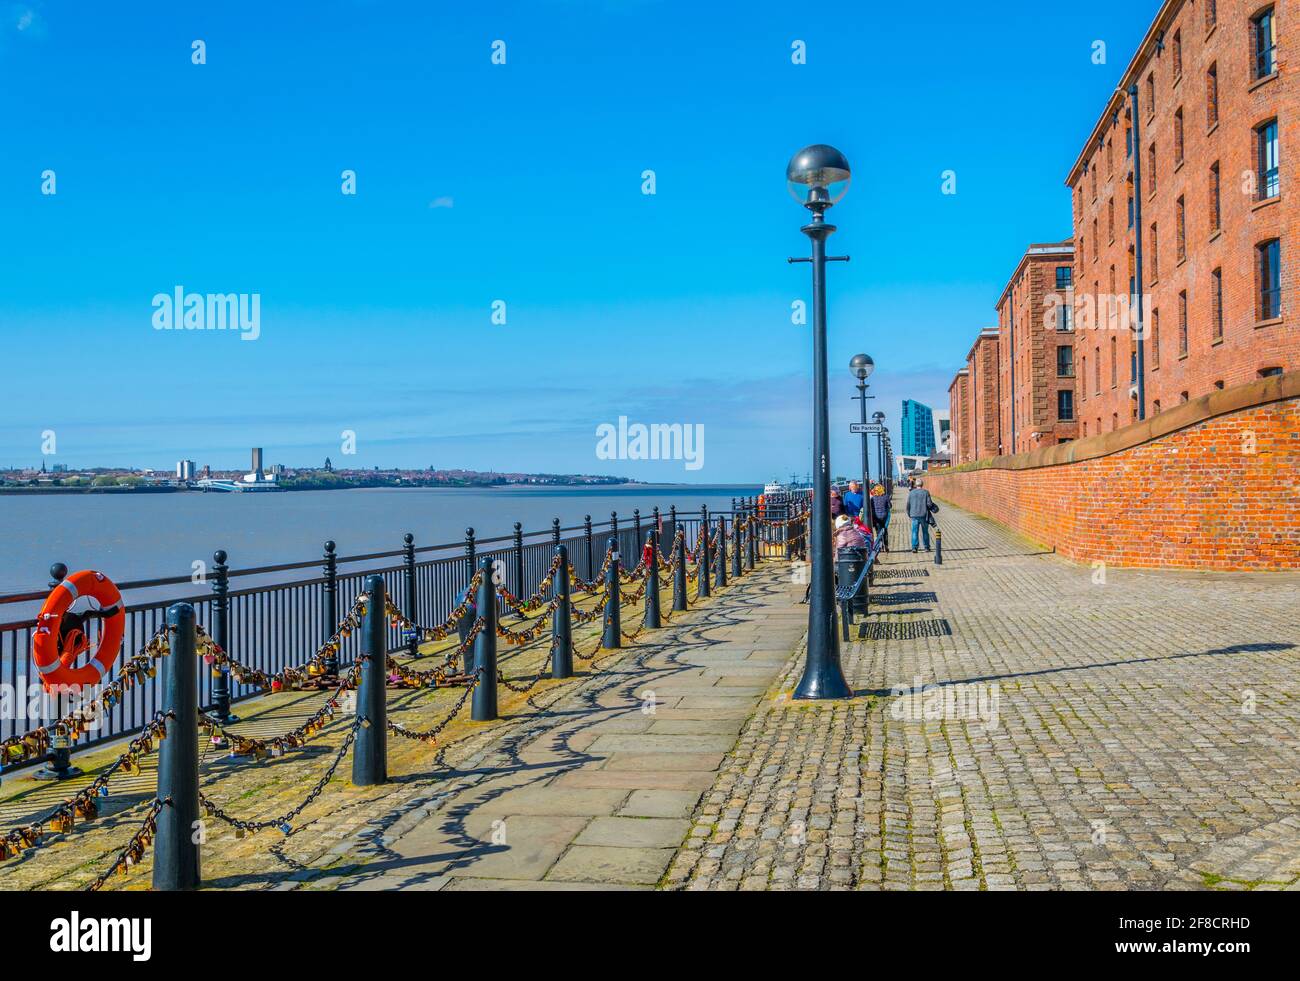 View of the kings parade in docklands of Liverpool, England Stock Photo